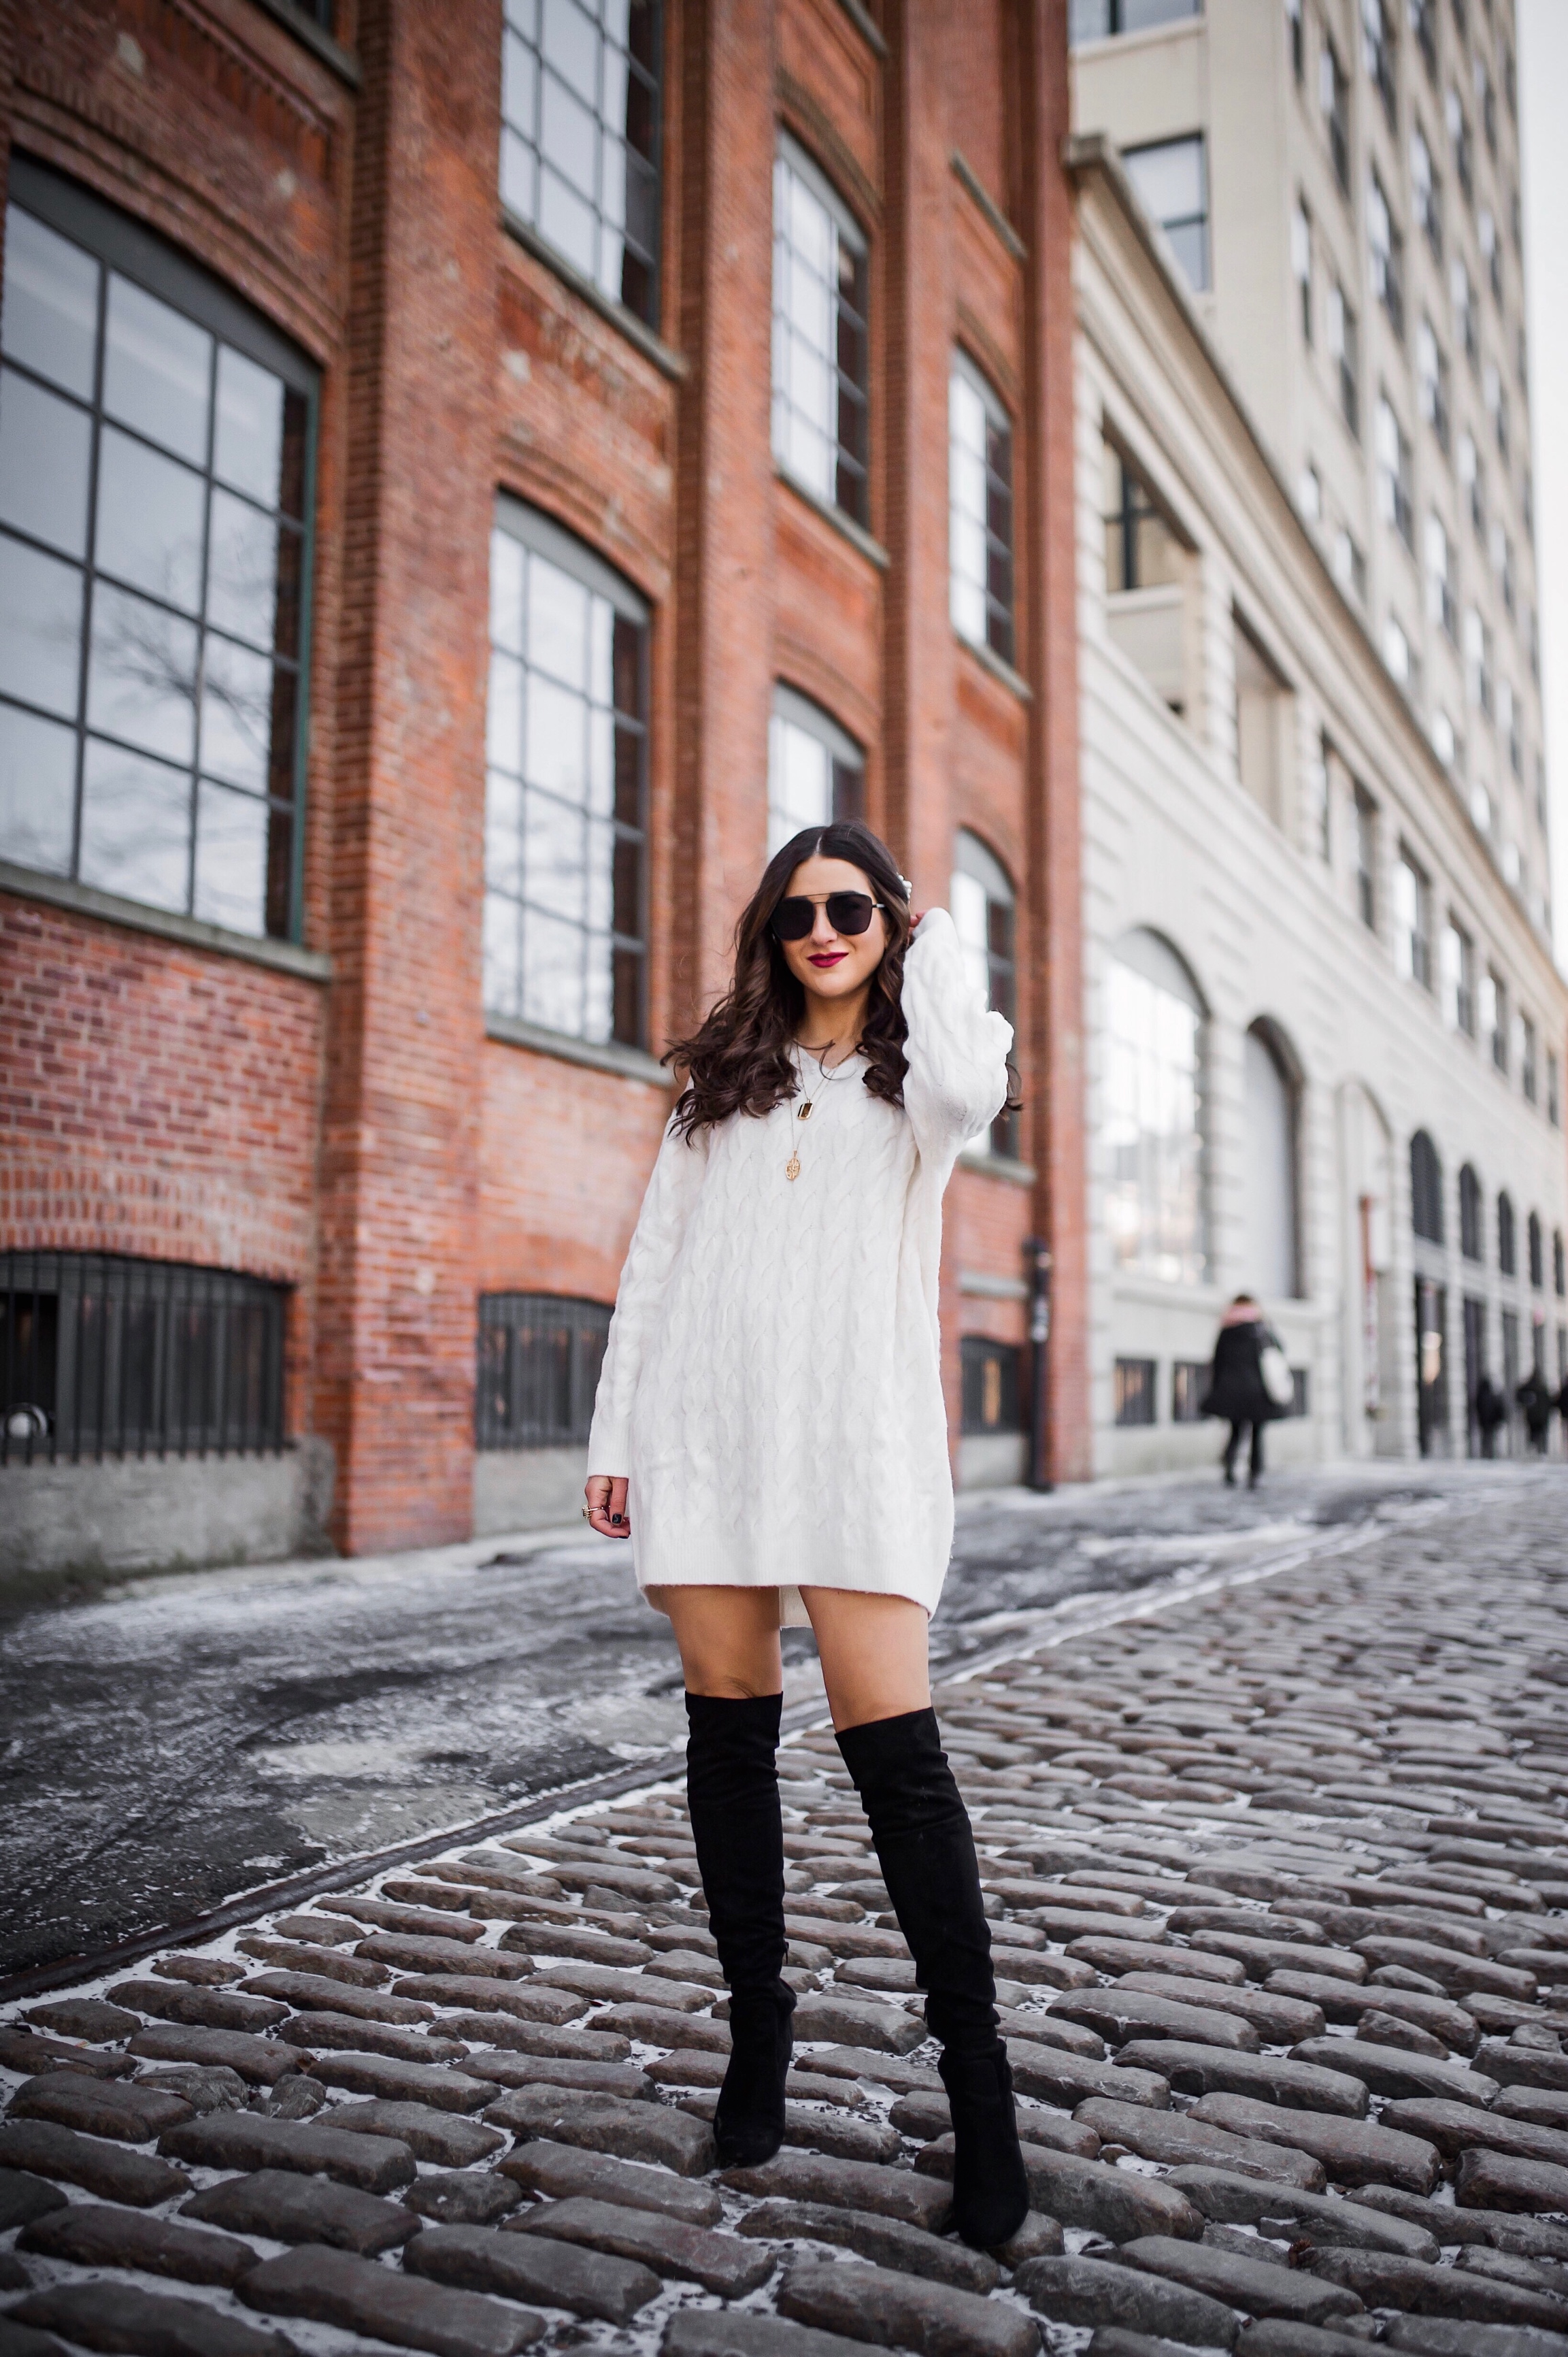 Are You Making This Business Mistake? Chunky White Sweater Dress Over The Knee Boots Esther Santer Fashion Blog NYC Street Style Blogger Outfit OOTD Trendy Shopping Girl What How Wear Industry Relationships Mindset Work Career Important Lesson  Boots.JPG